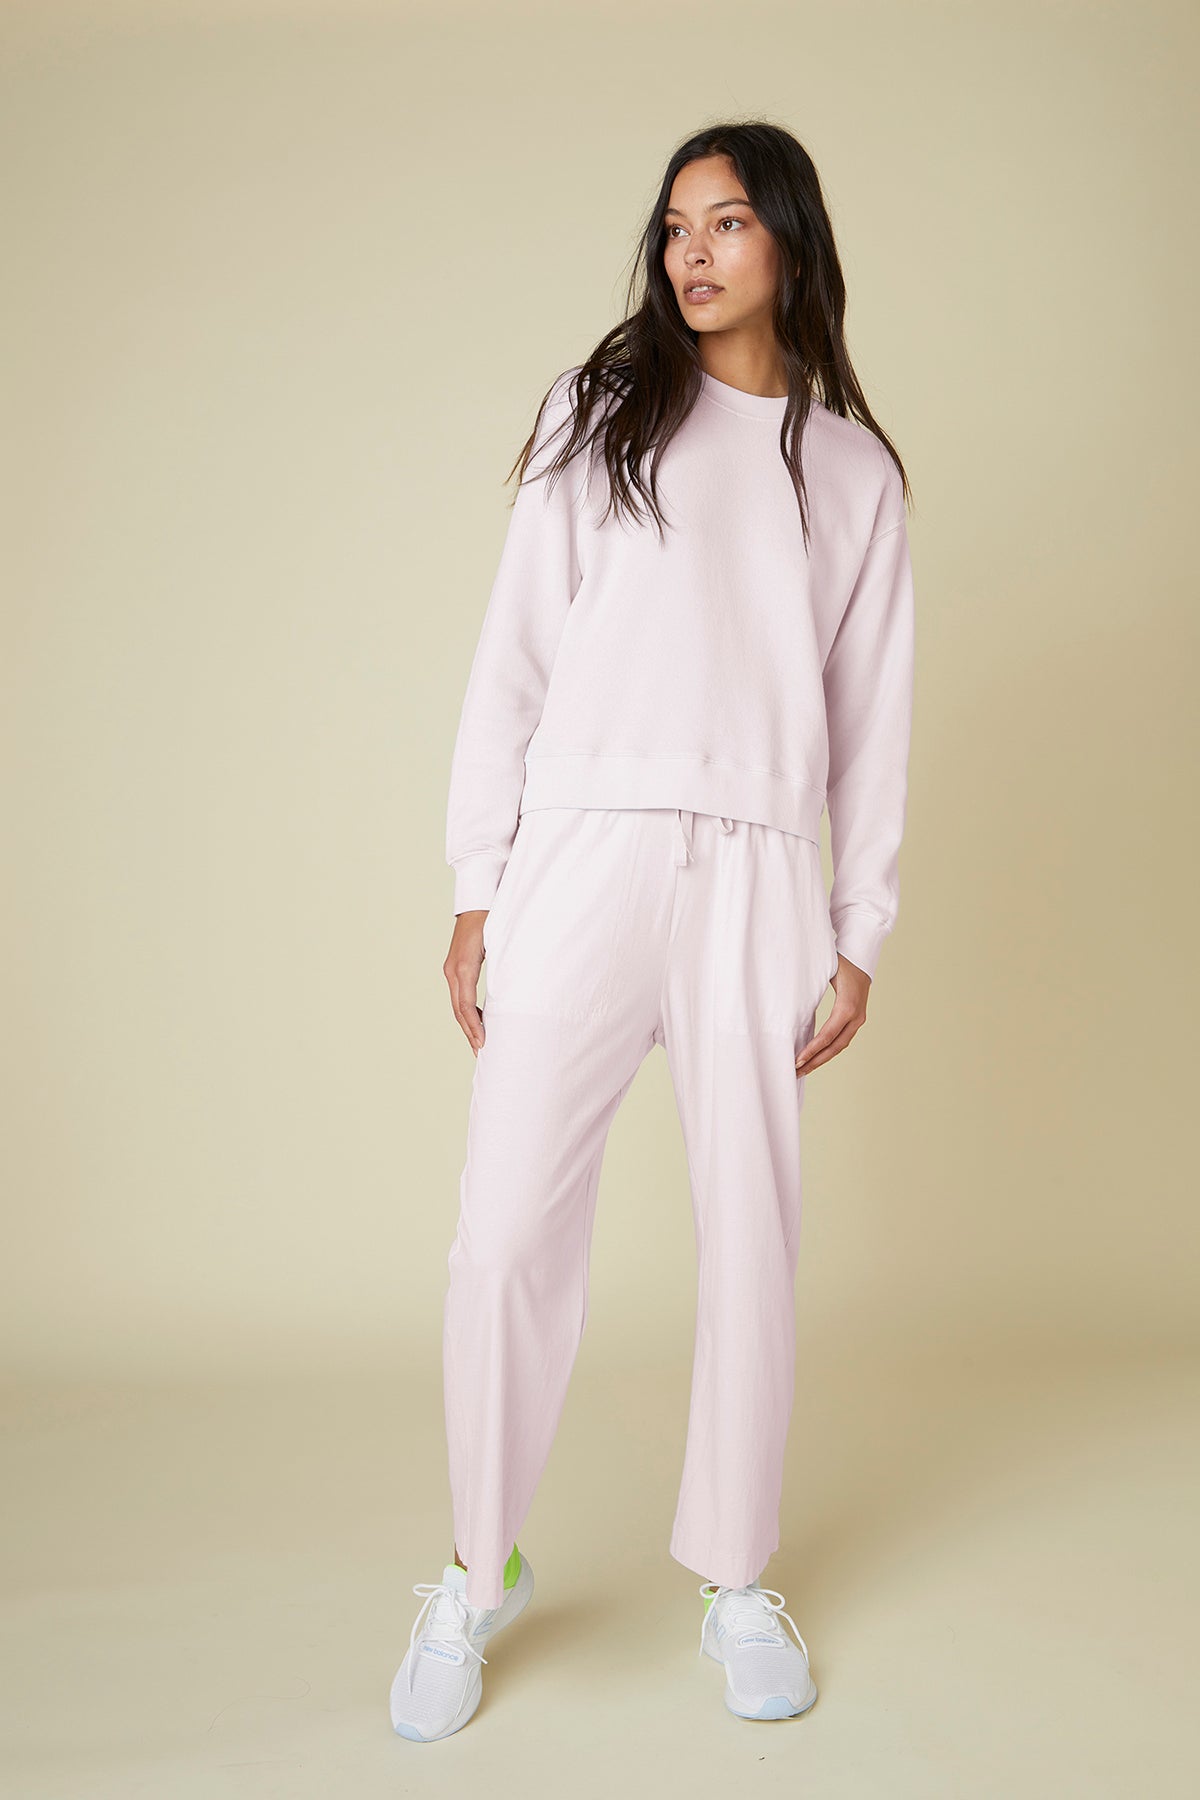 Pismo Pant in Pale Pink-24782949482689